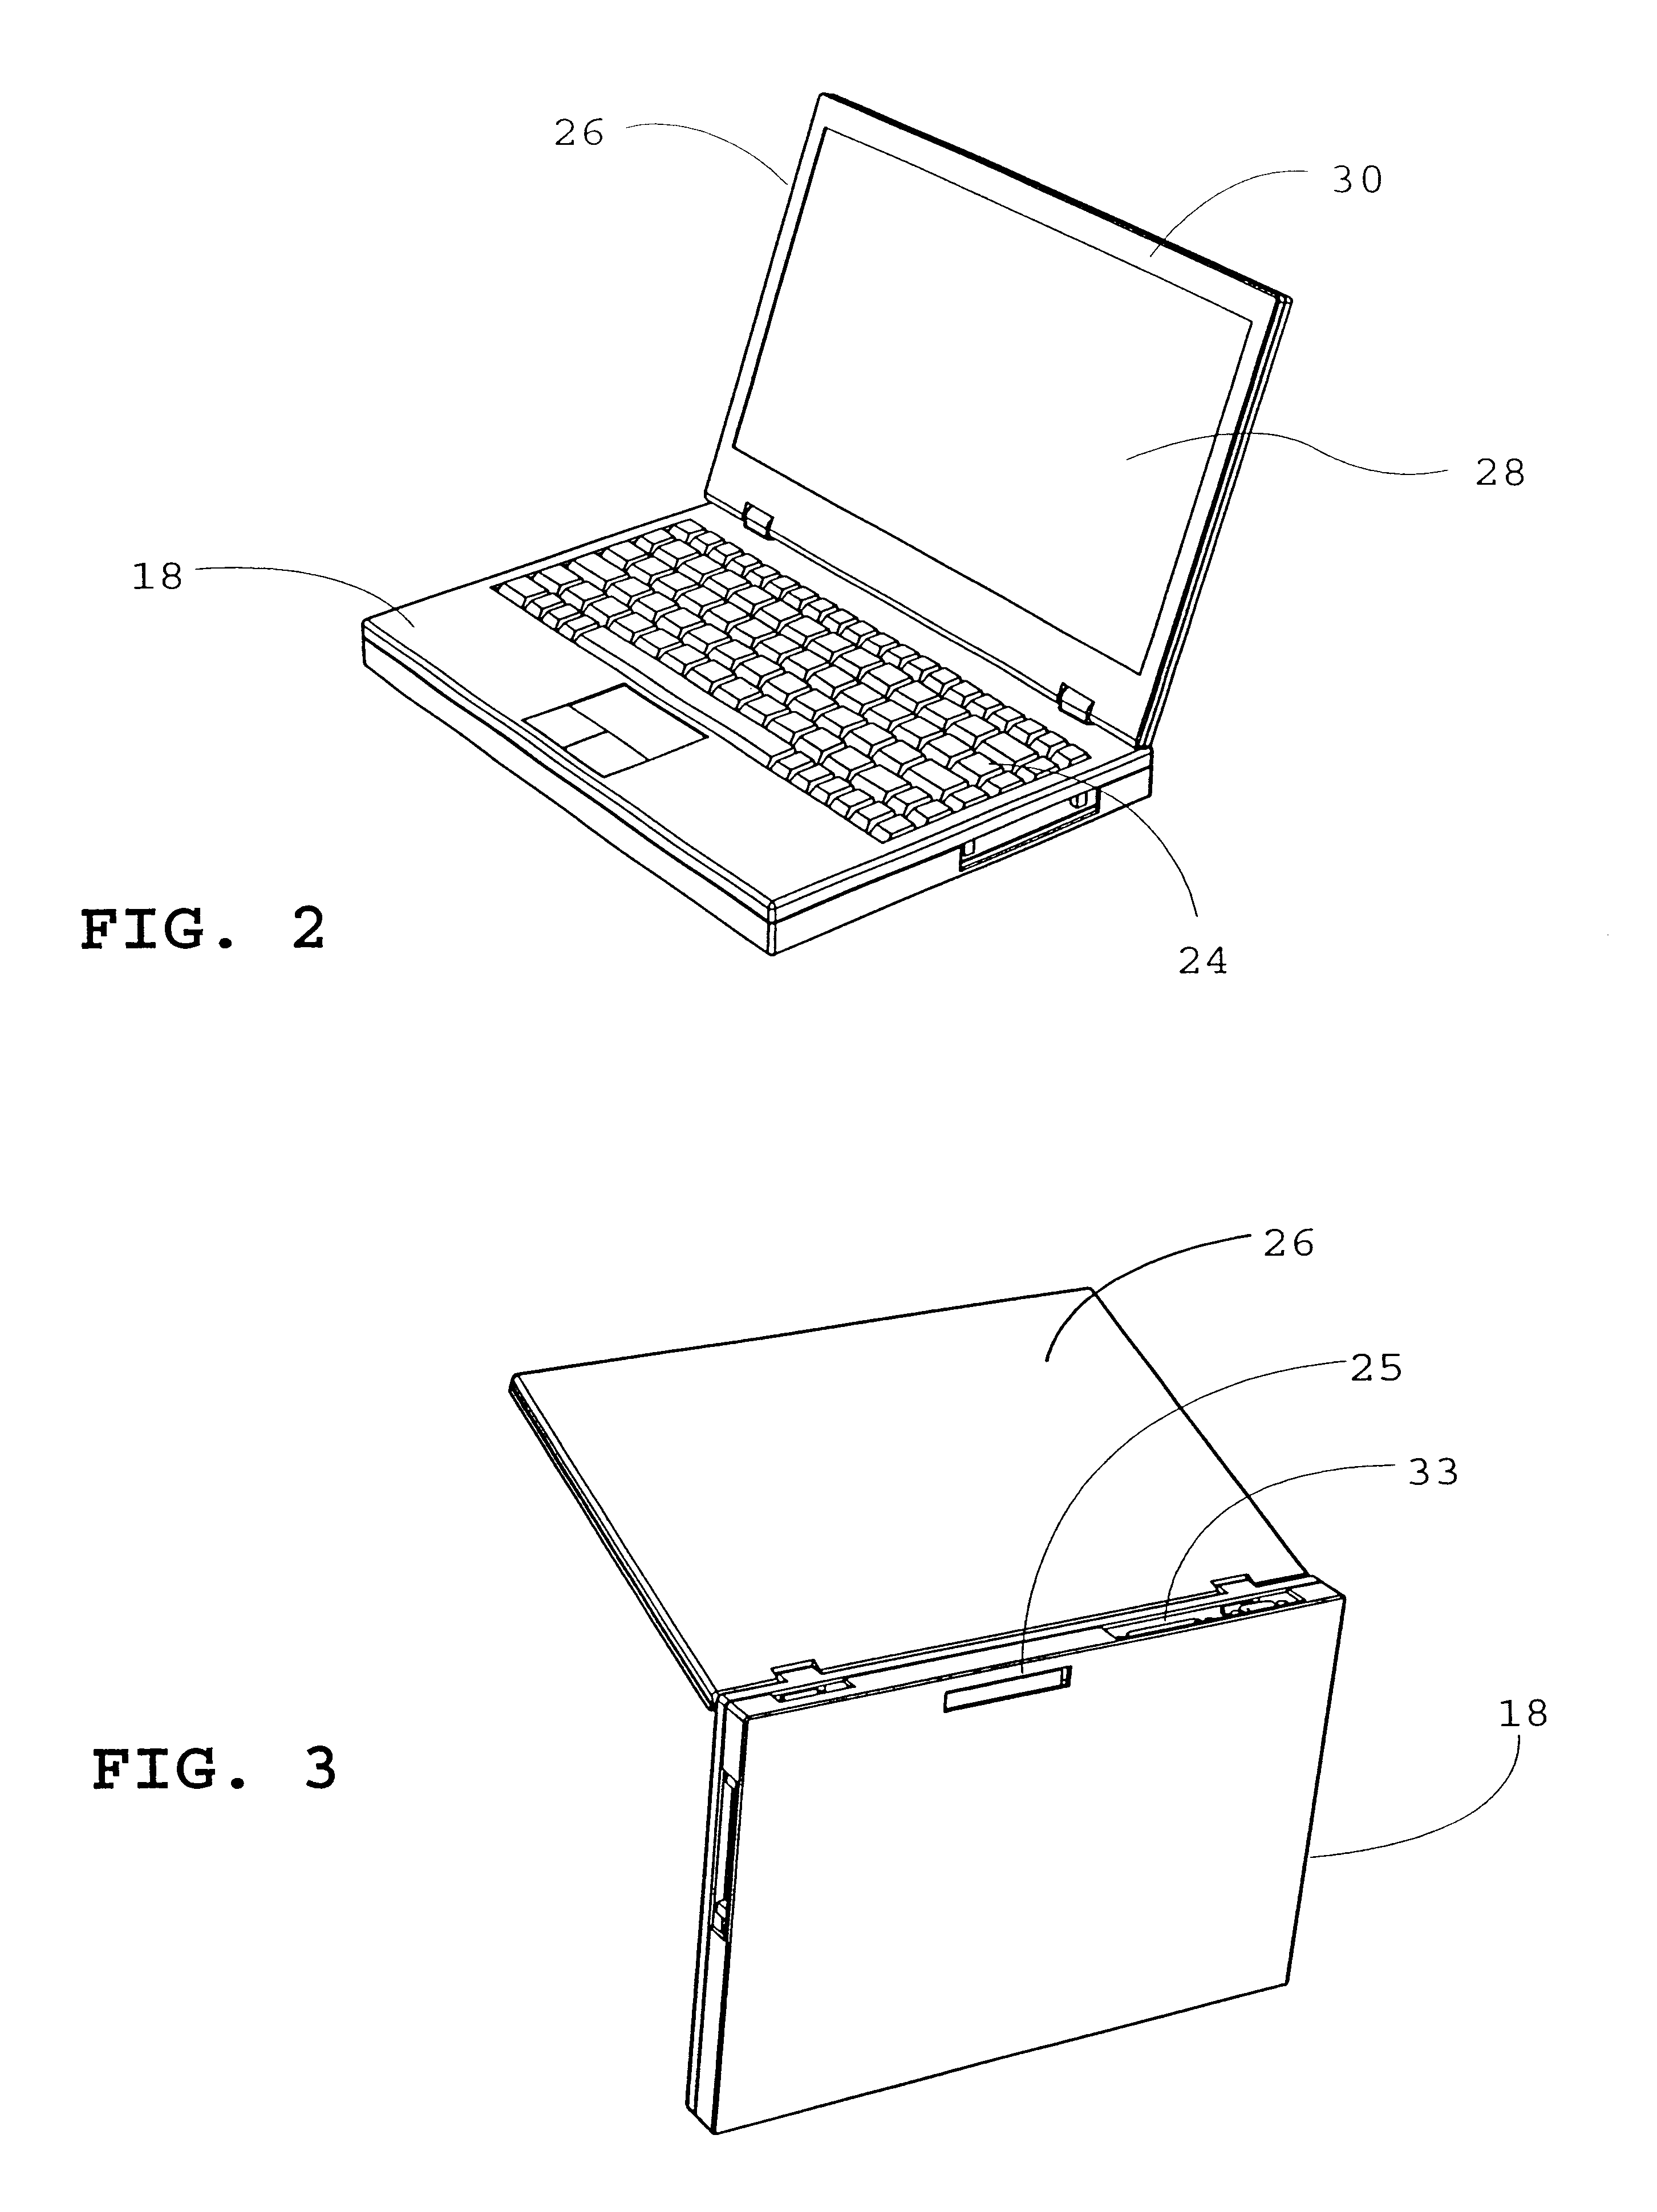 Vertical docking and positioning apparatus for a portable computer